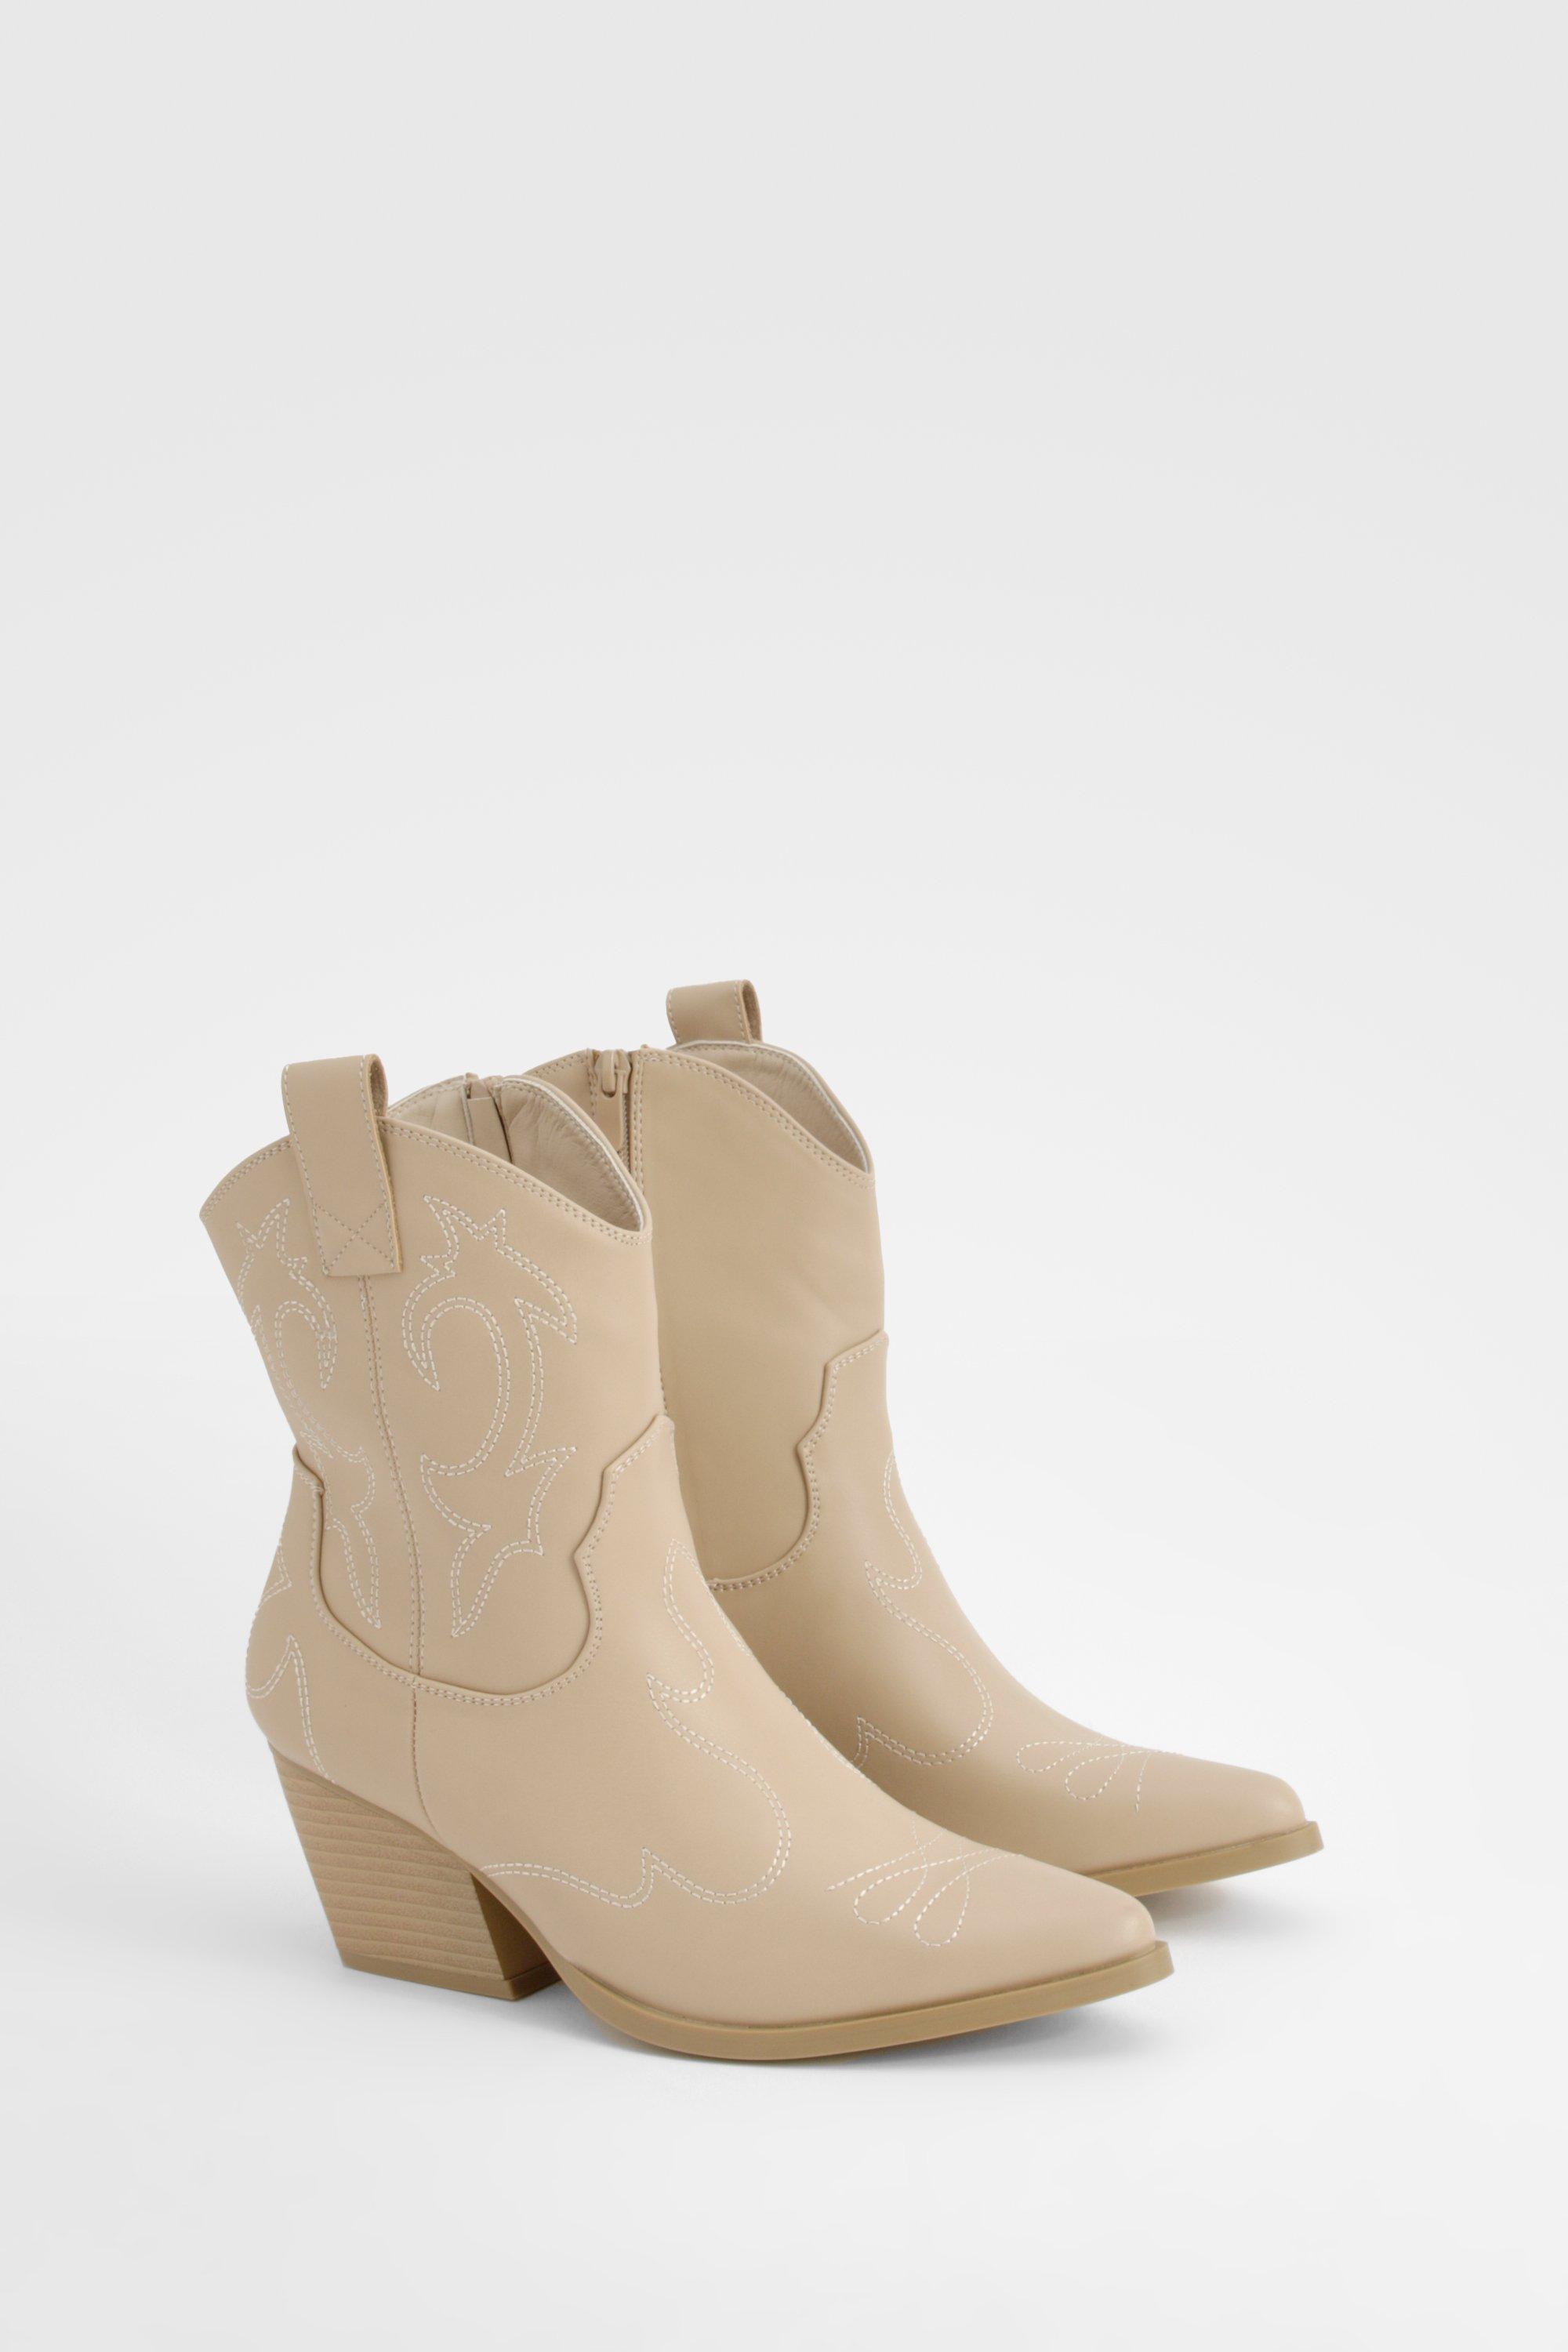 Boohoo Stitch Detail Western Ankle Boots, Sand